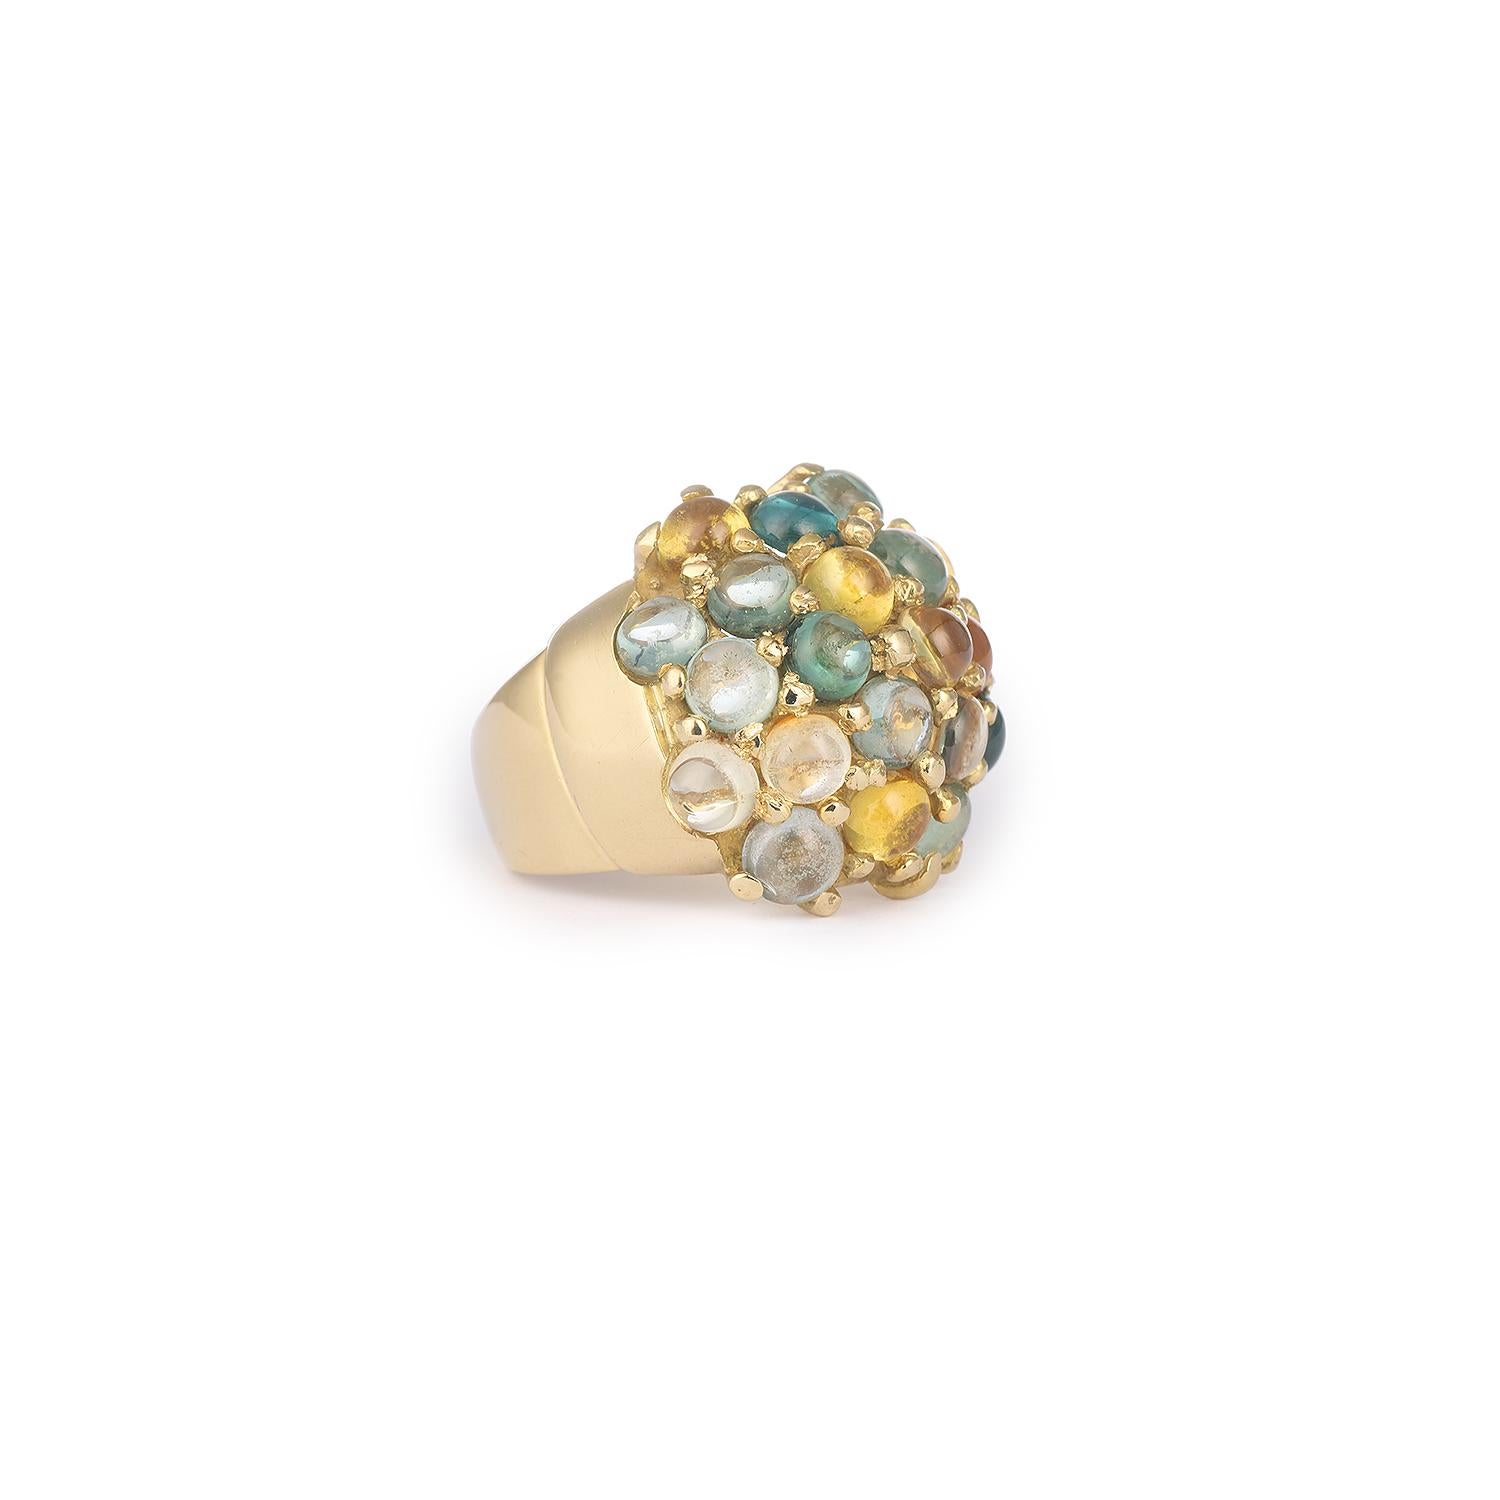 Ring set with 20 colored cabochon gem-stones (colored quartz, colored topaz ...)

18K yellow gold, 750 / 00th (Italian hallmark)

Size of the ring : 51 (FR) / 5.5 (US)

Diemensions of the ring : 2 x 1.8 x 0.8 cm (0.78 x 0.70 x 0.31 inch)

Weight of